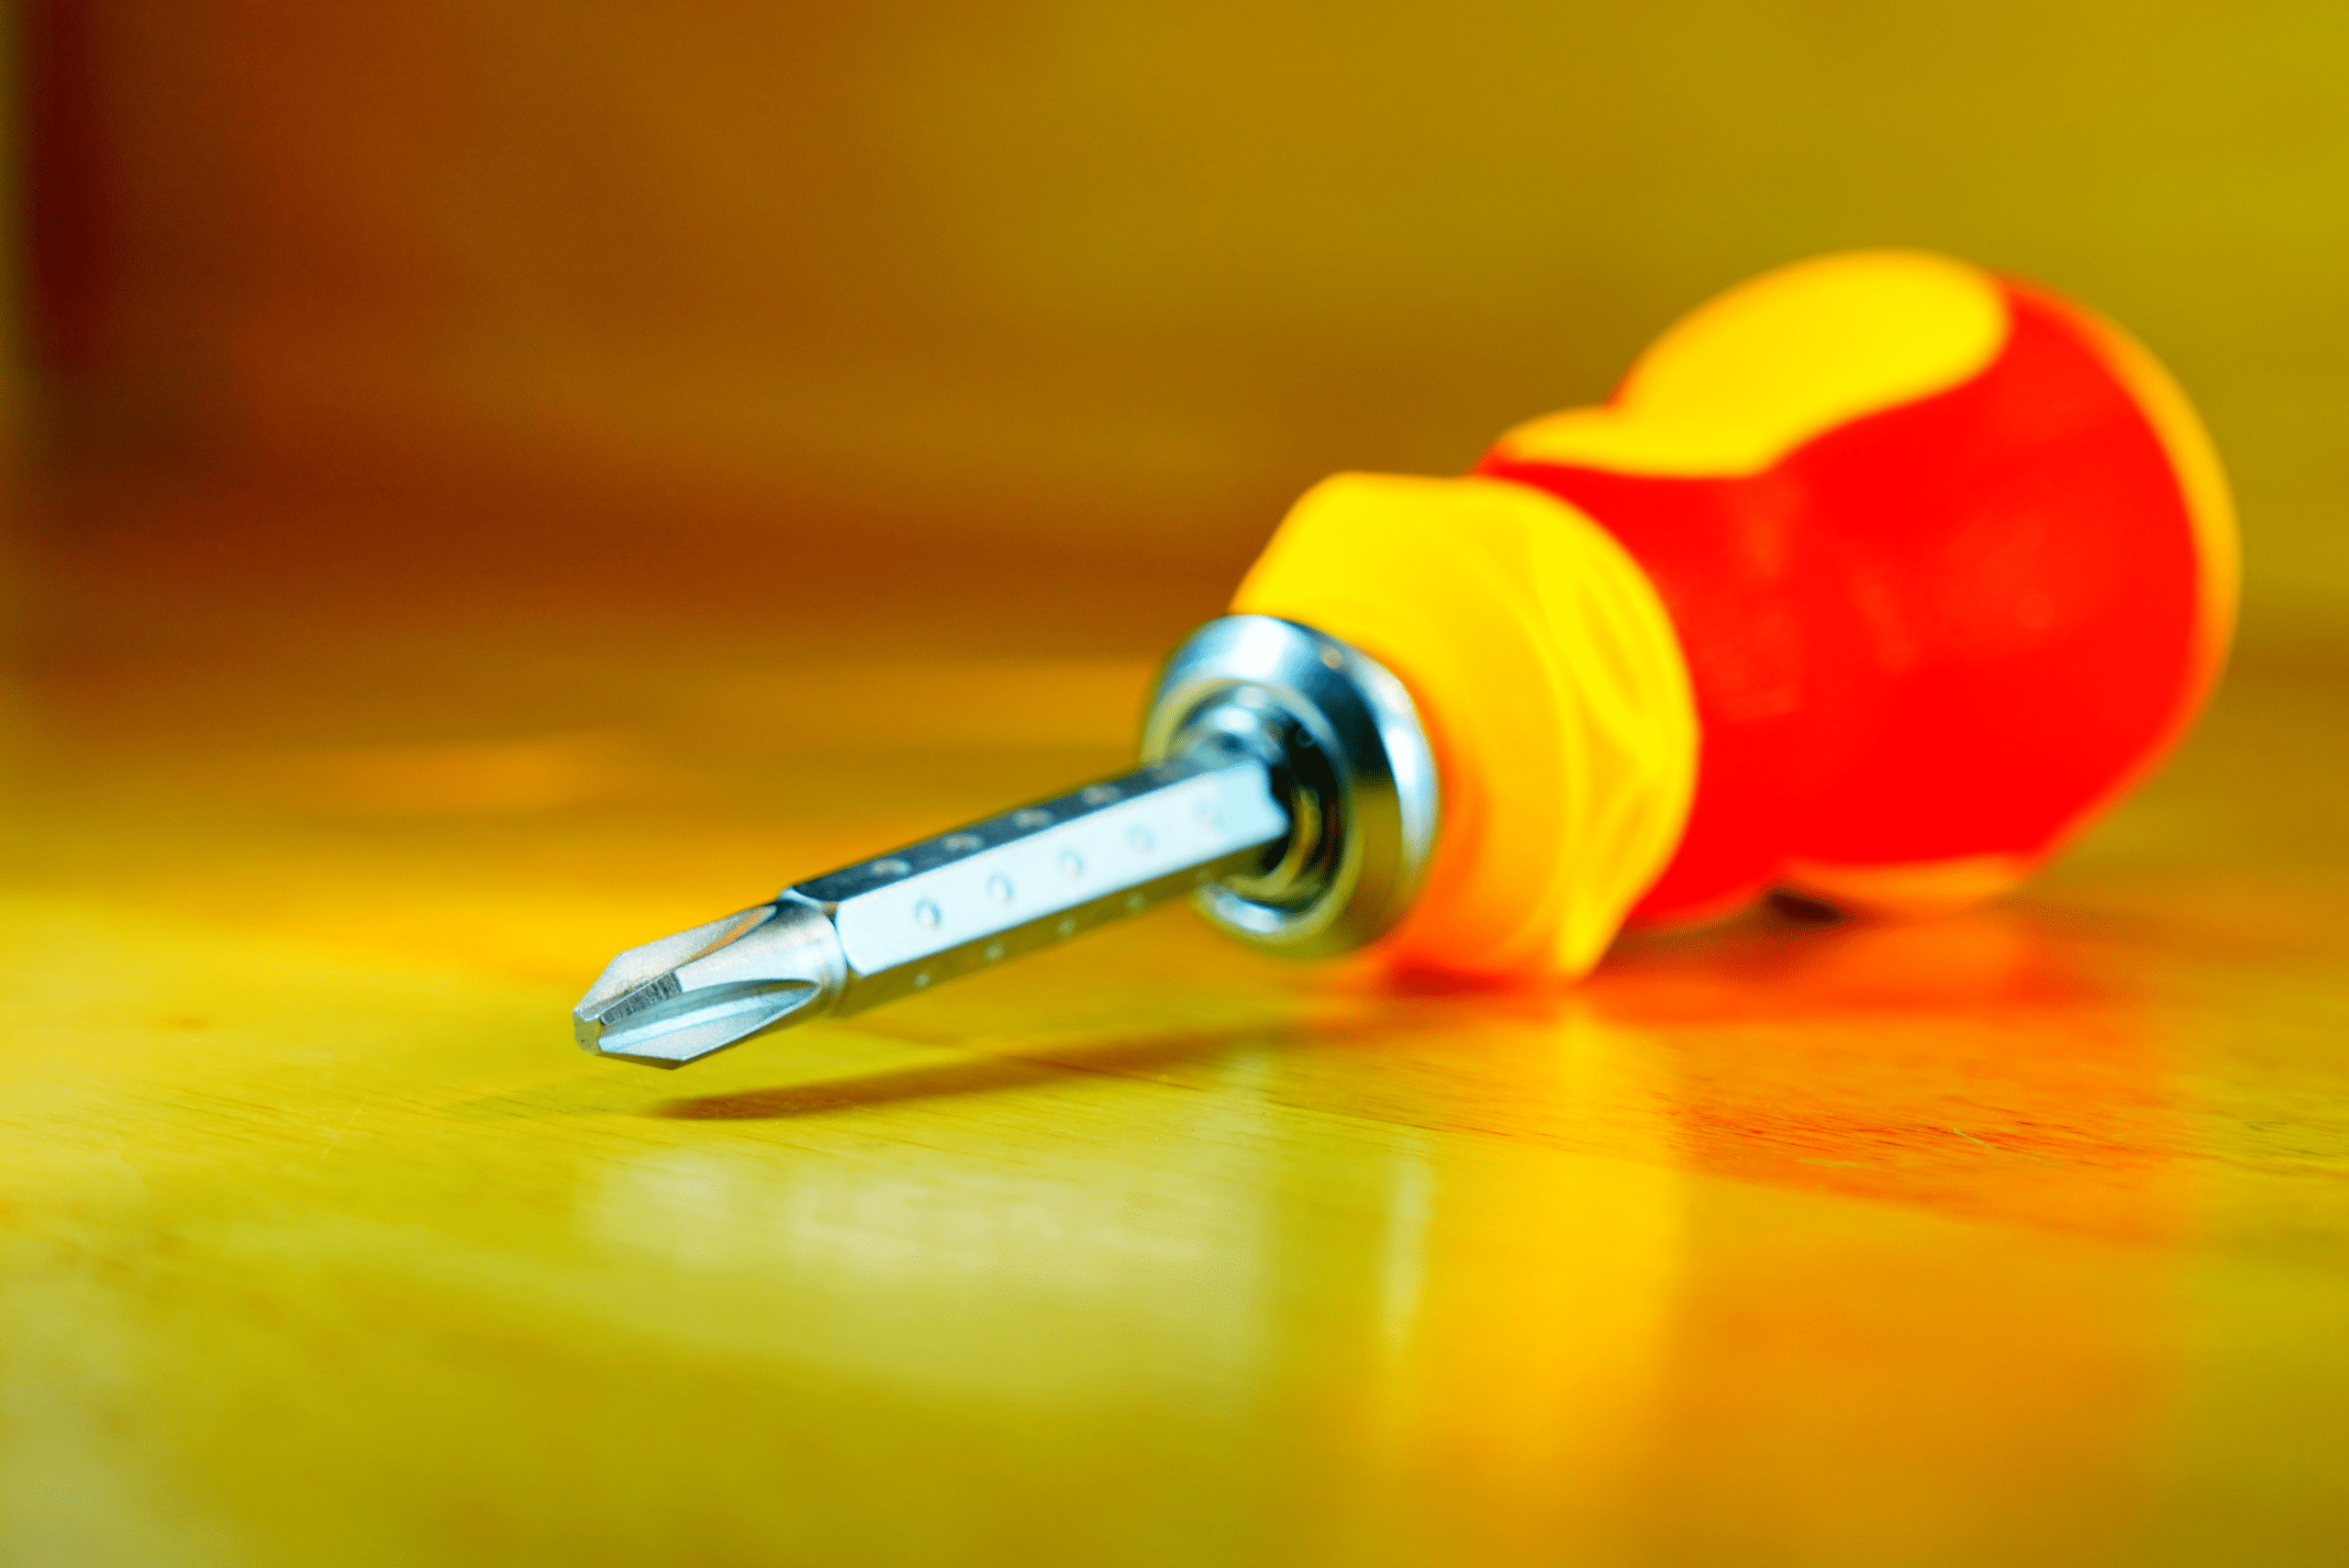 A philips stubby screwdriver.